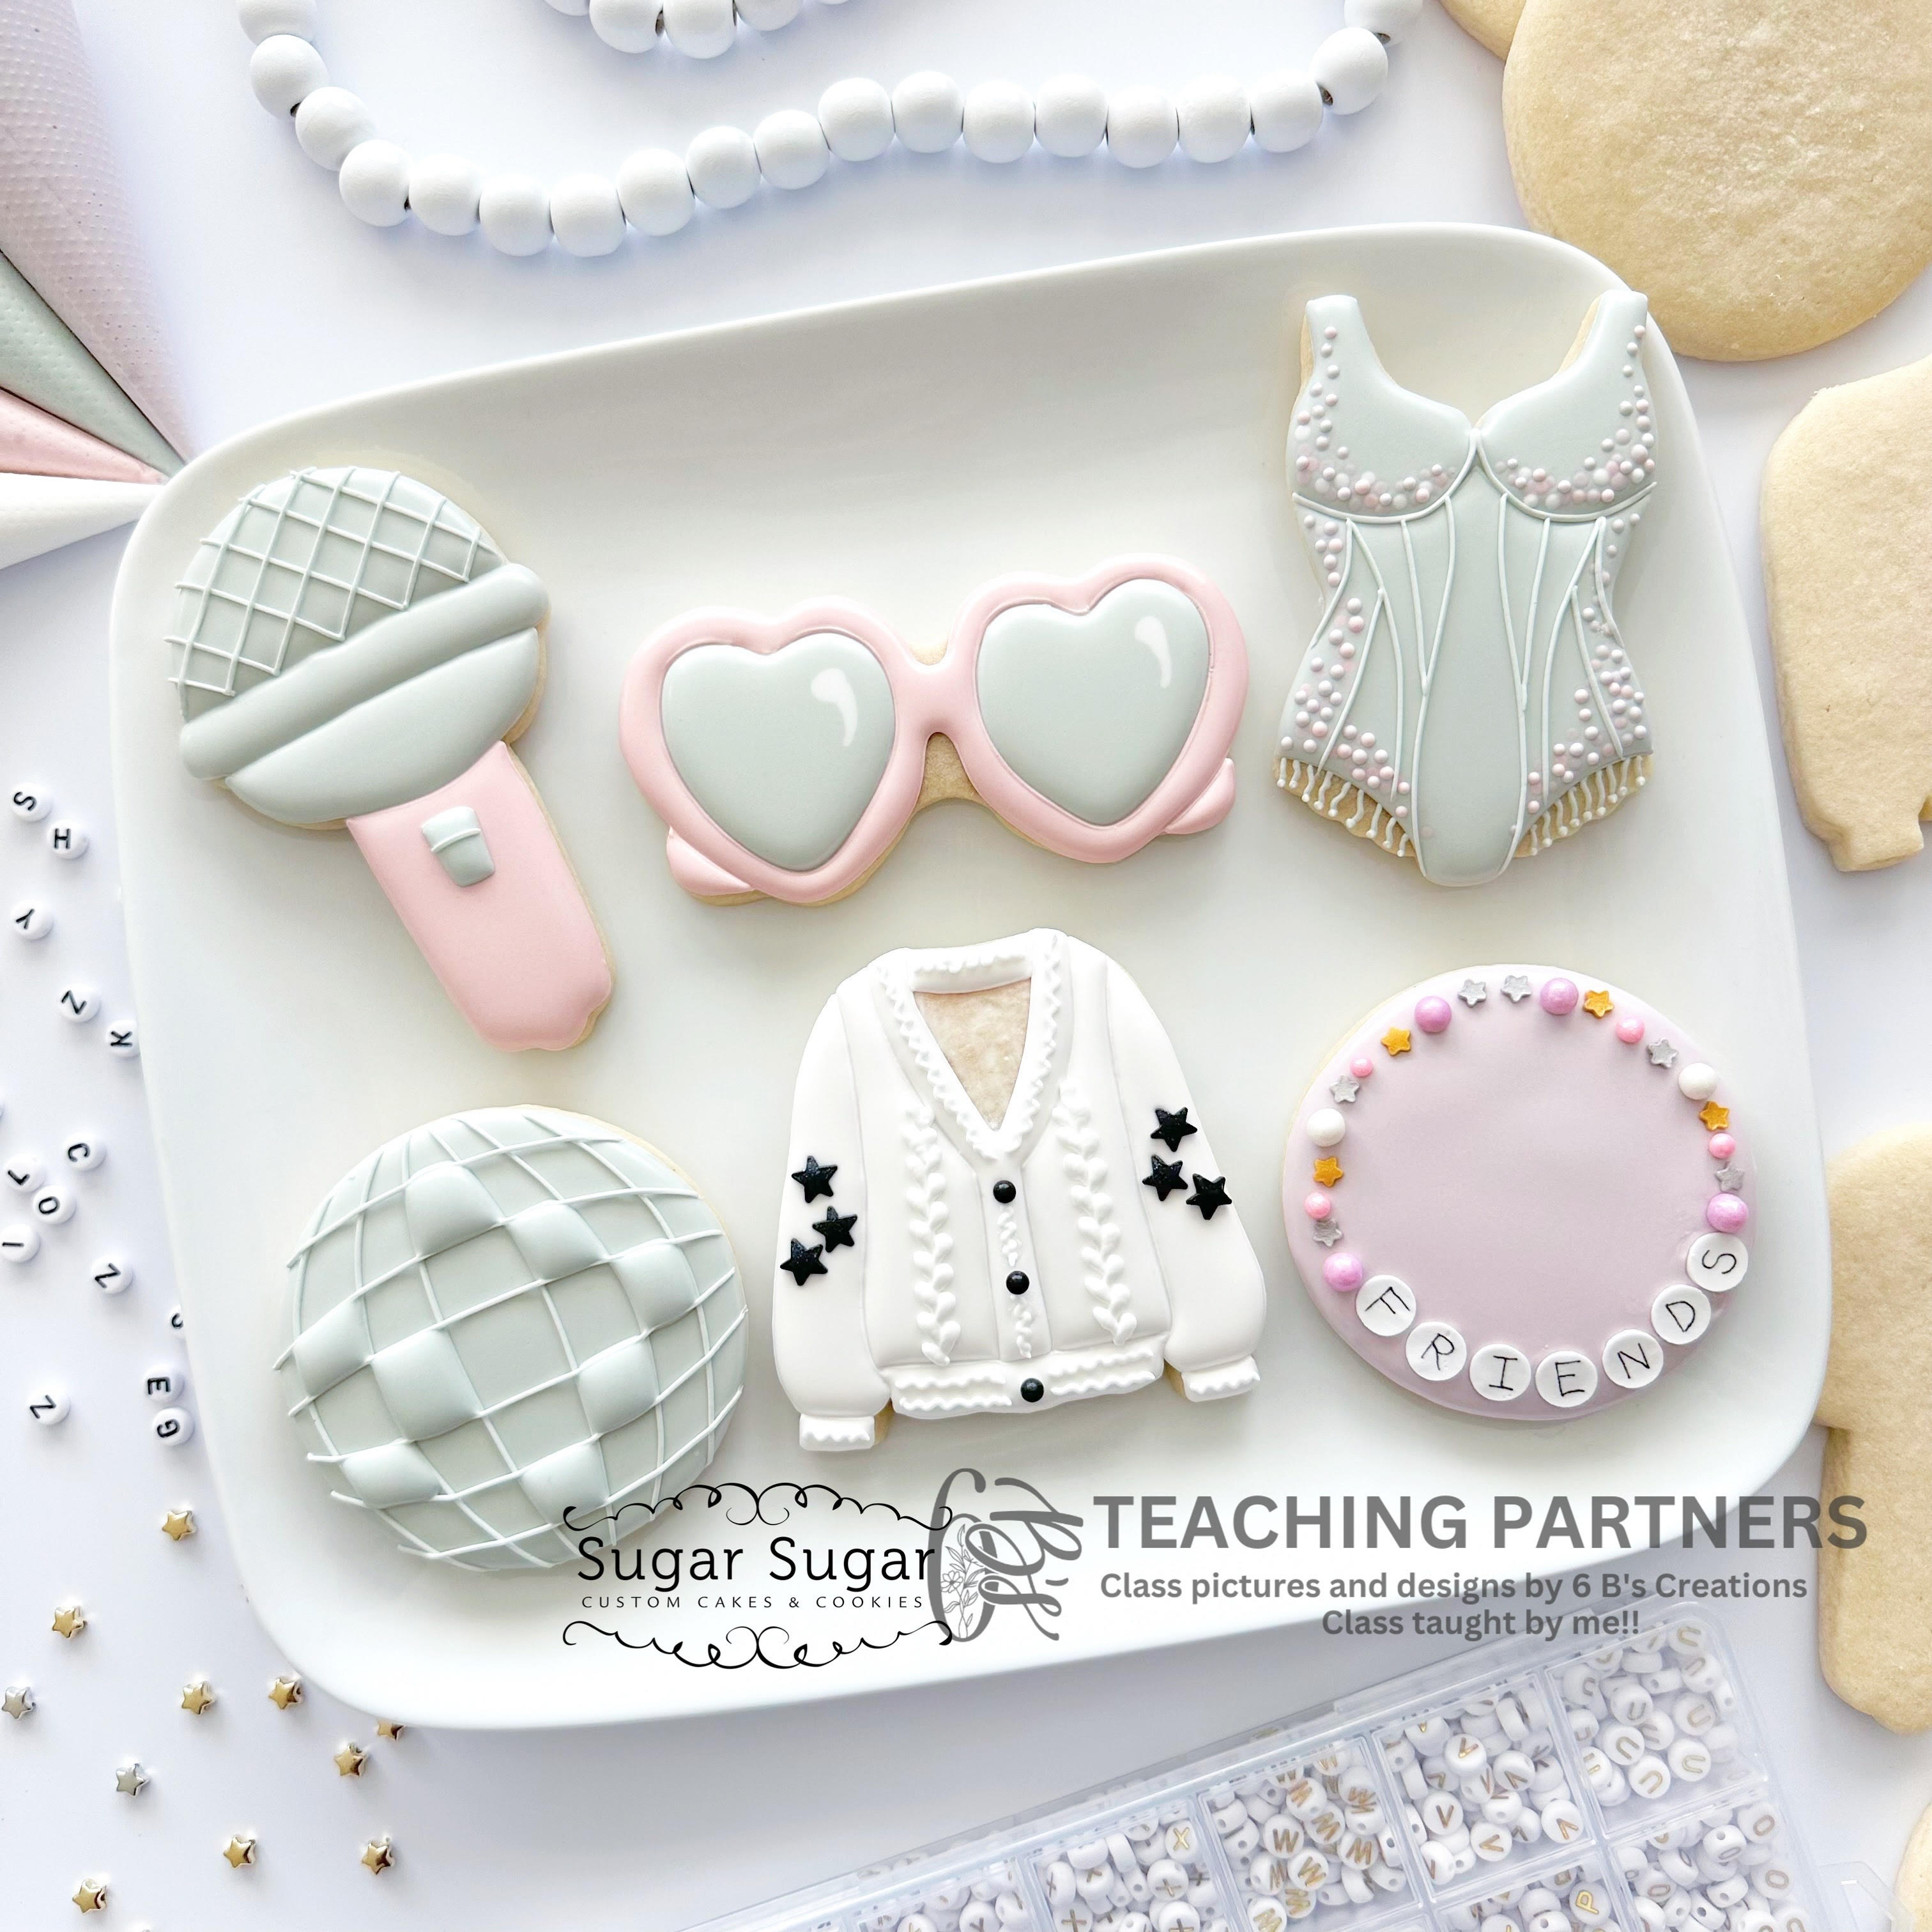 TAYLOR SWIFT Cookie Decorating Workshop with Sugar Sugar Bakery! 2:00-4:00pm *Image coming soon! *Must register by 4/18/24!